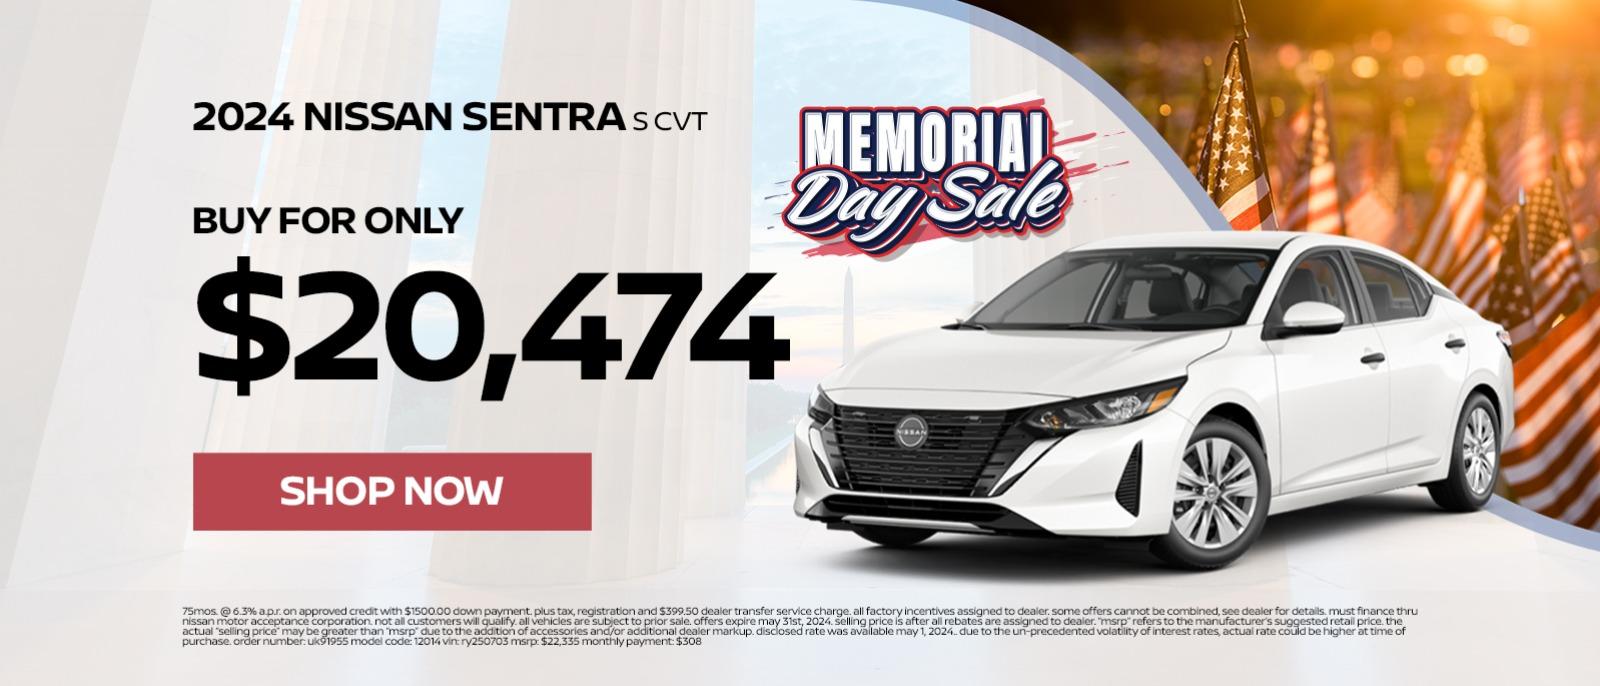 2024 Nissan Sentra
Buy for Only
$20,474